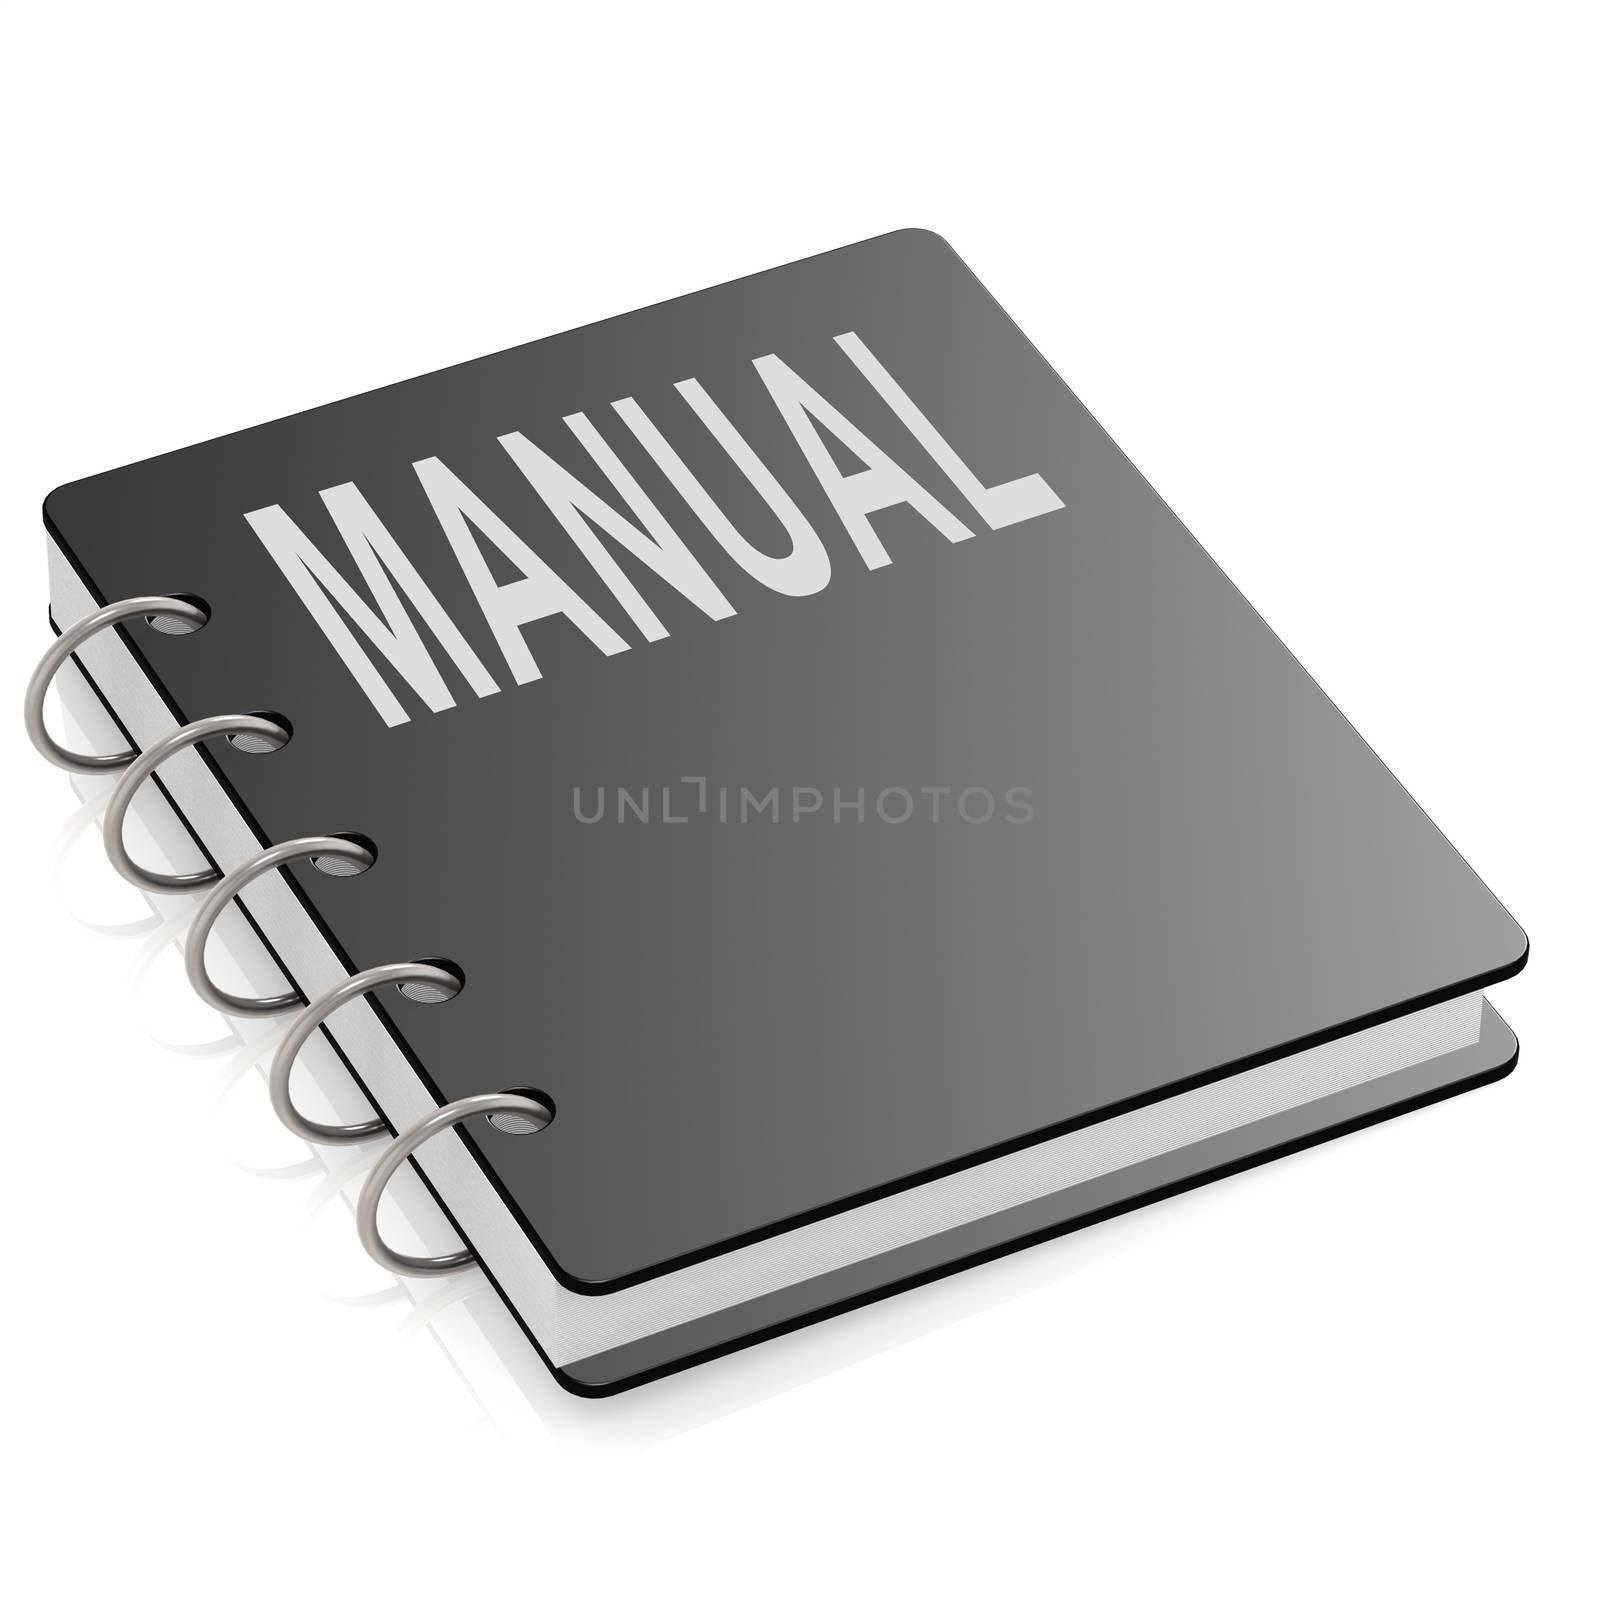 Manual with hard cover book, 3D rendering